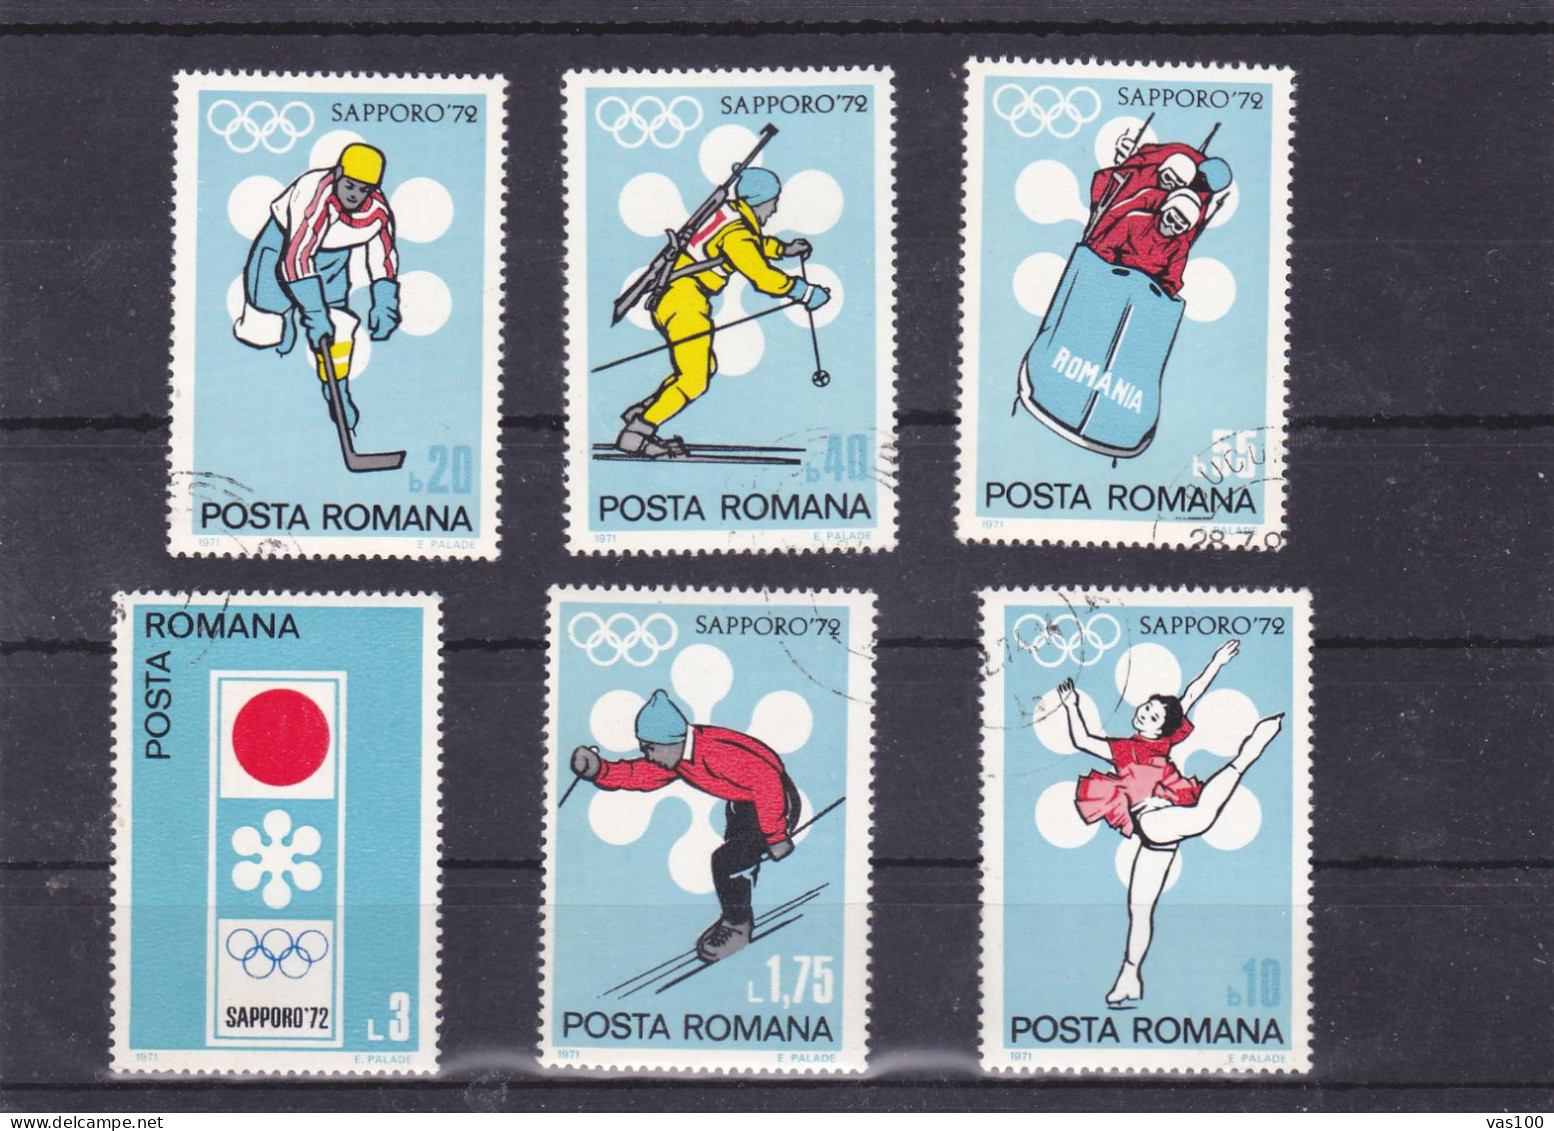 1971 Romania 2984-2989 1972 Olympic Games In Sapporo Used - Used Stamps